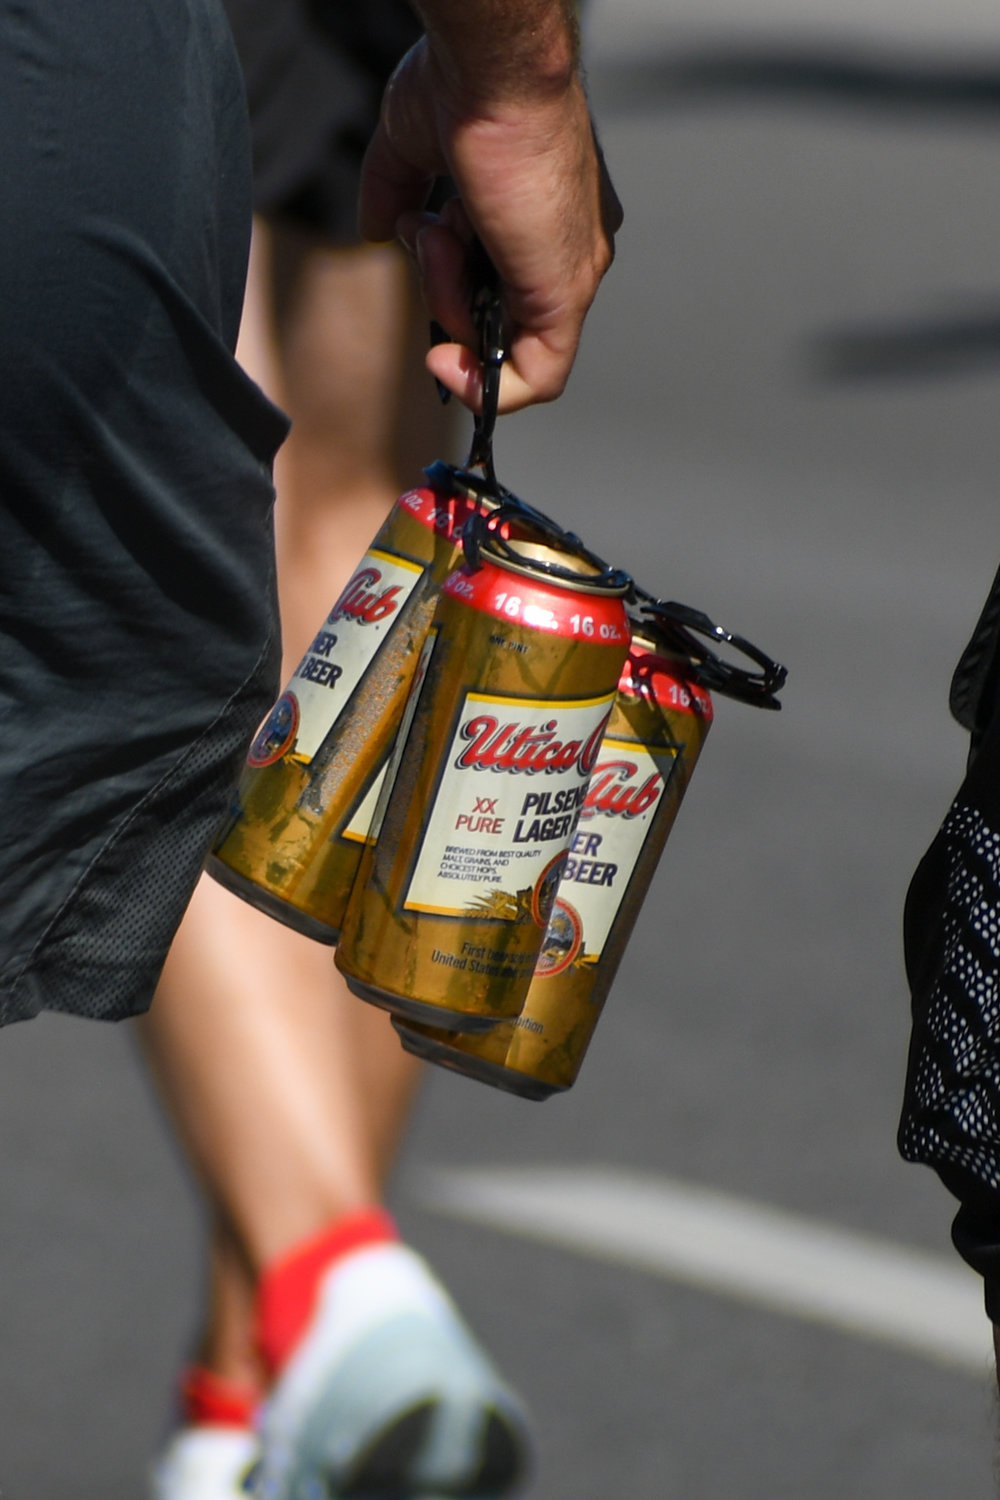 One runner sought to refuel with Utica Club, carrying a six-pack and taking a drink along the 15K Boilermaker course.